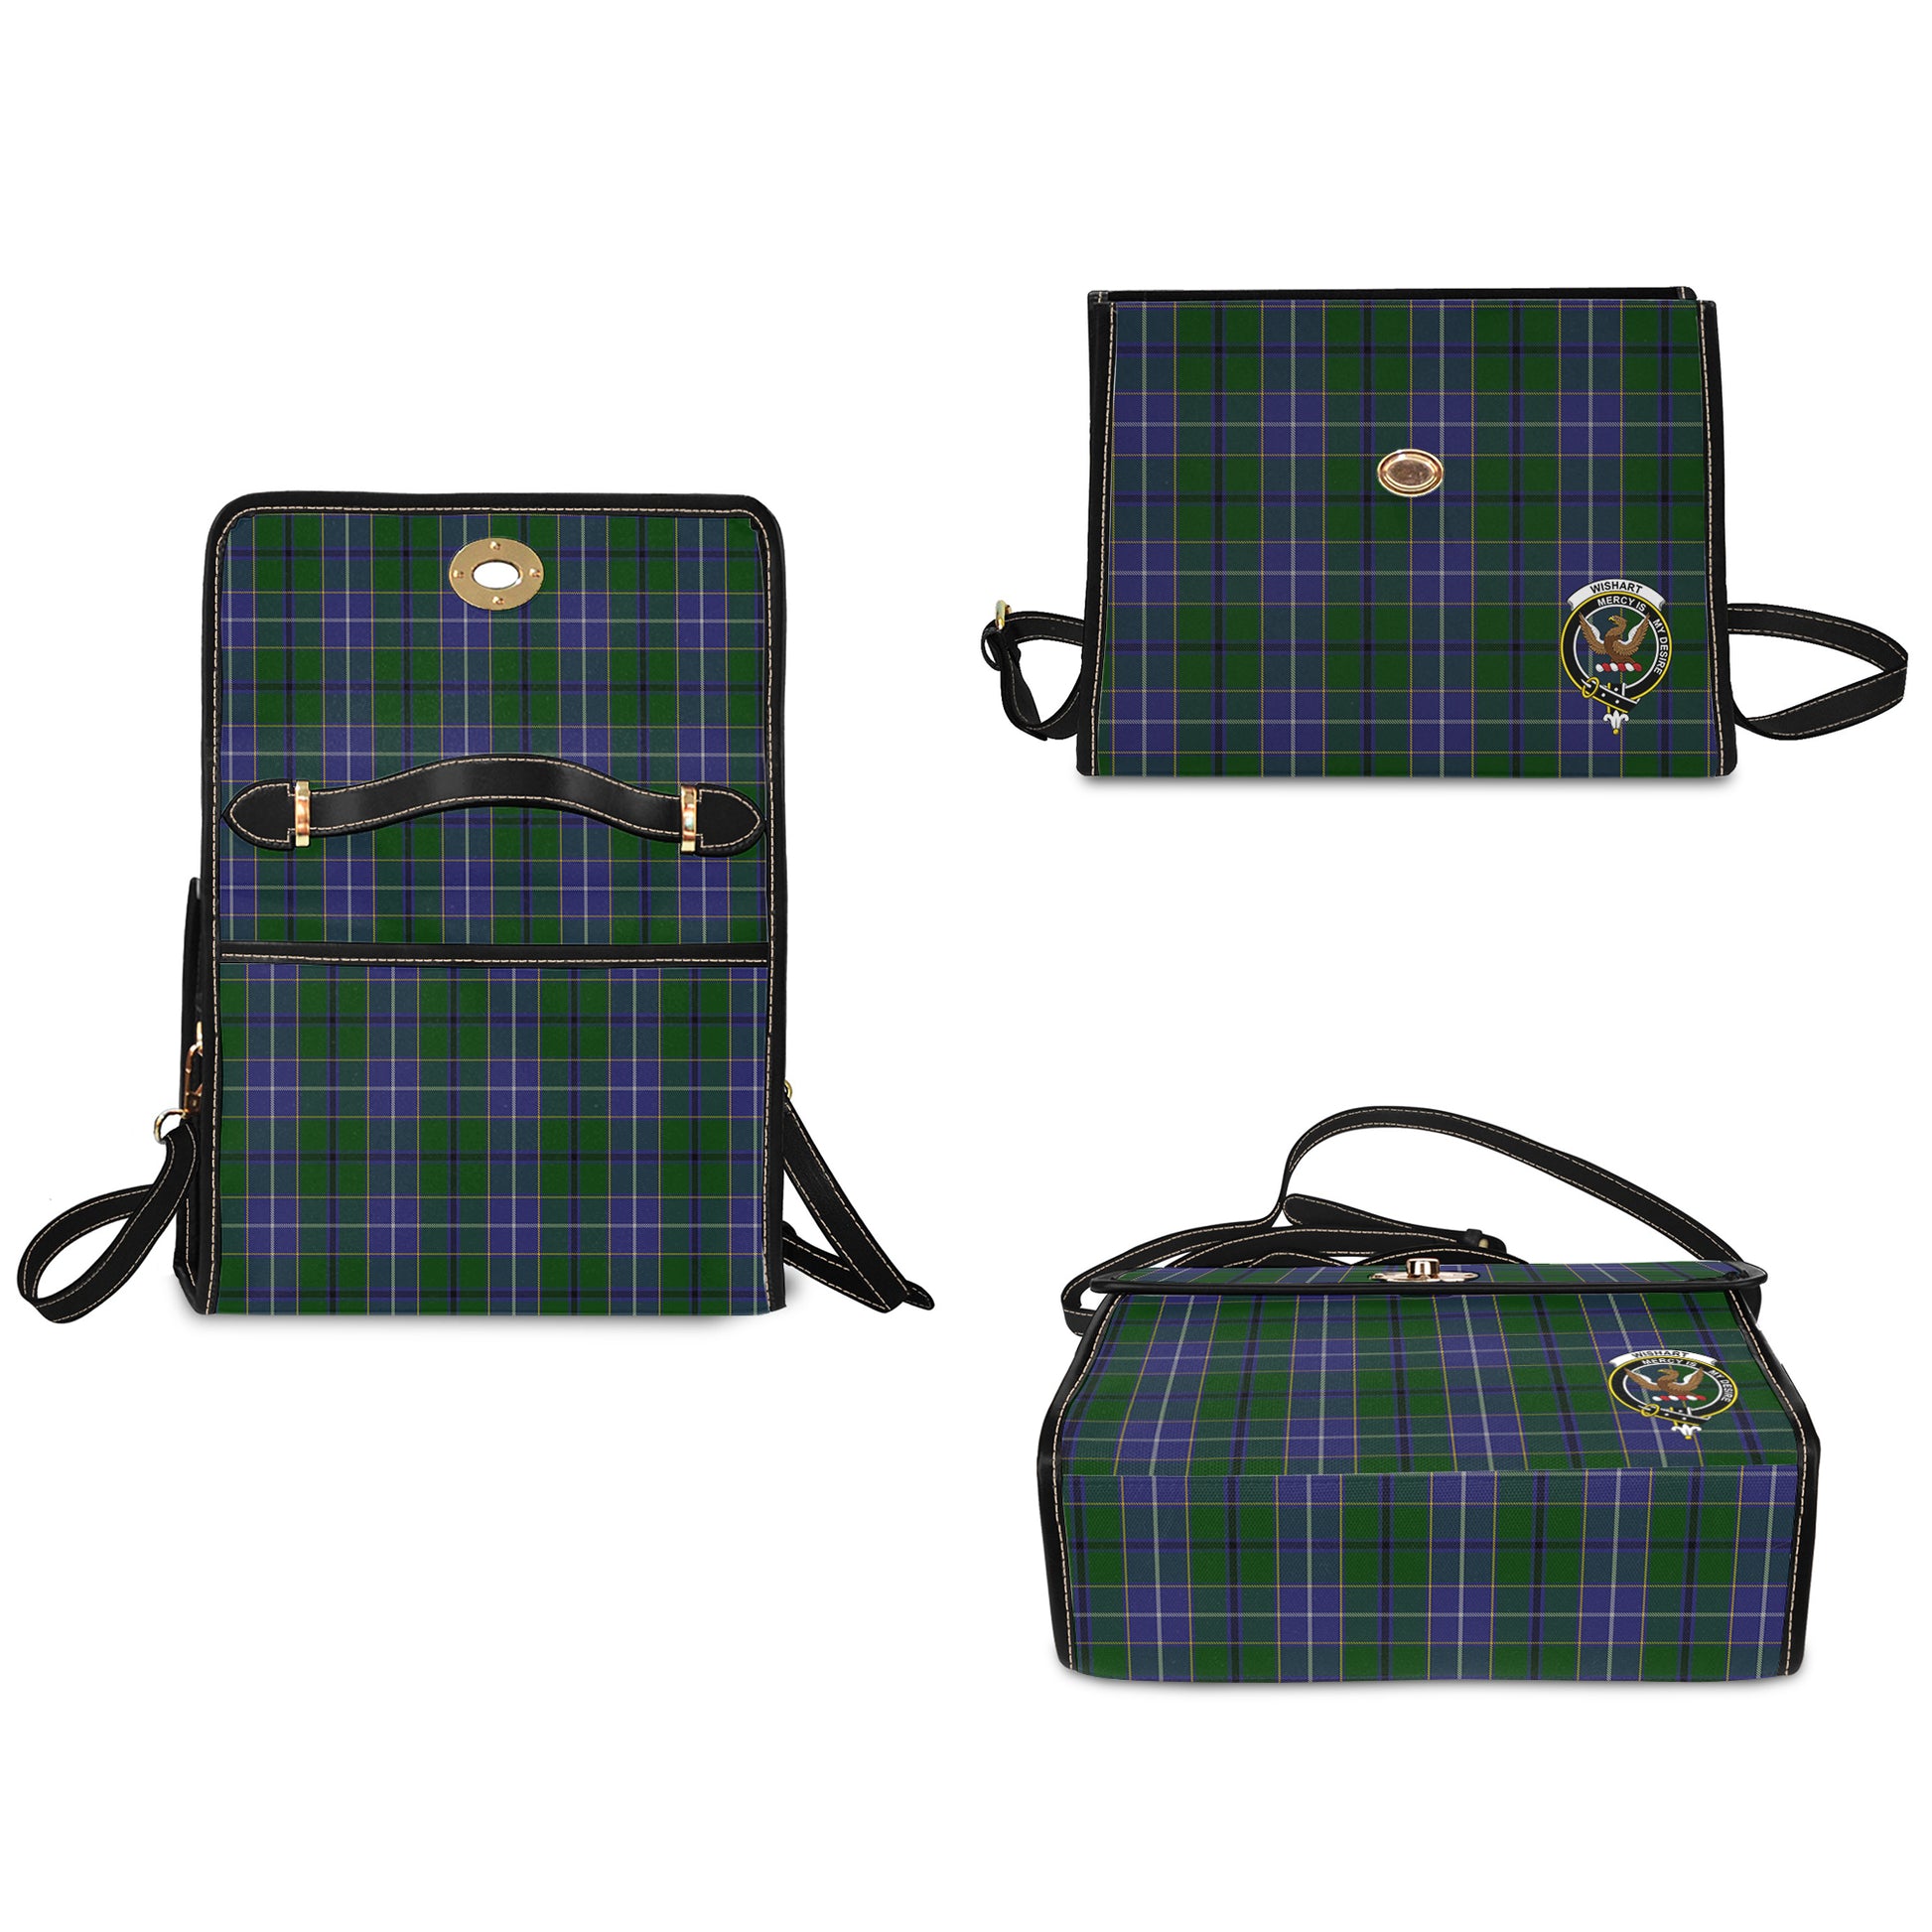 wishart-hunting-tartan-leather-strap-waterproof-canvas-bag-with-family-crest